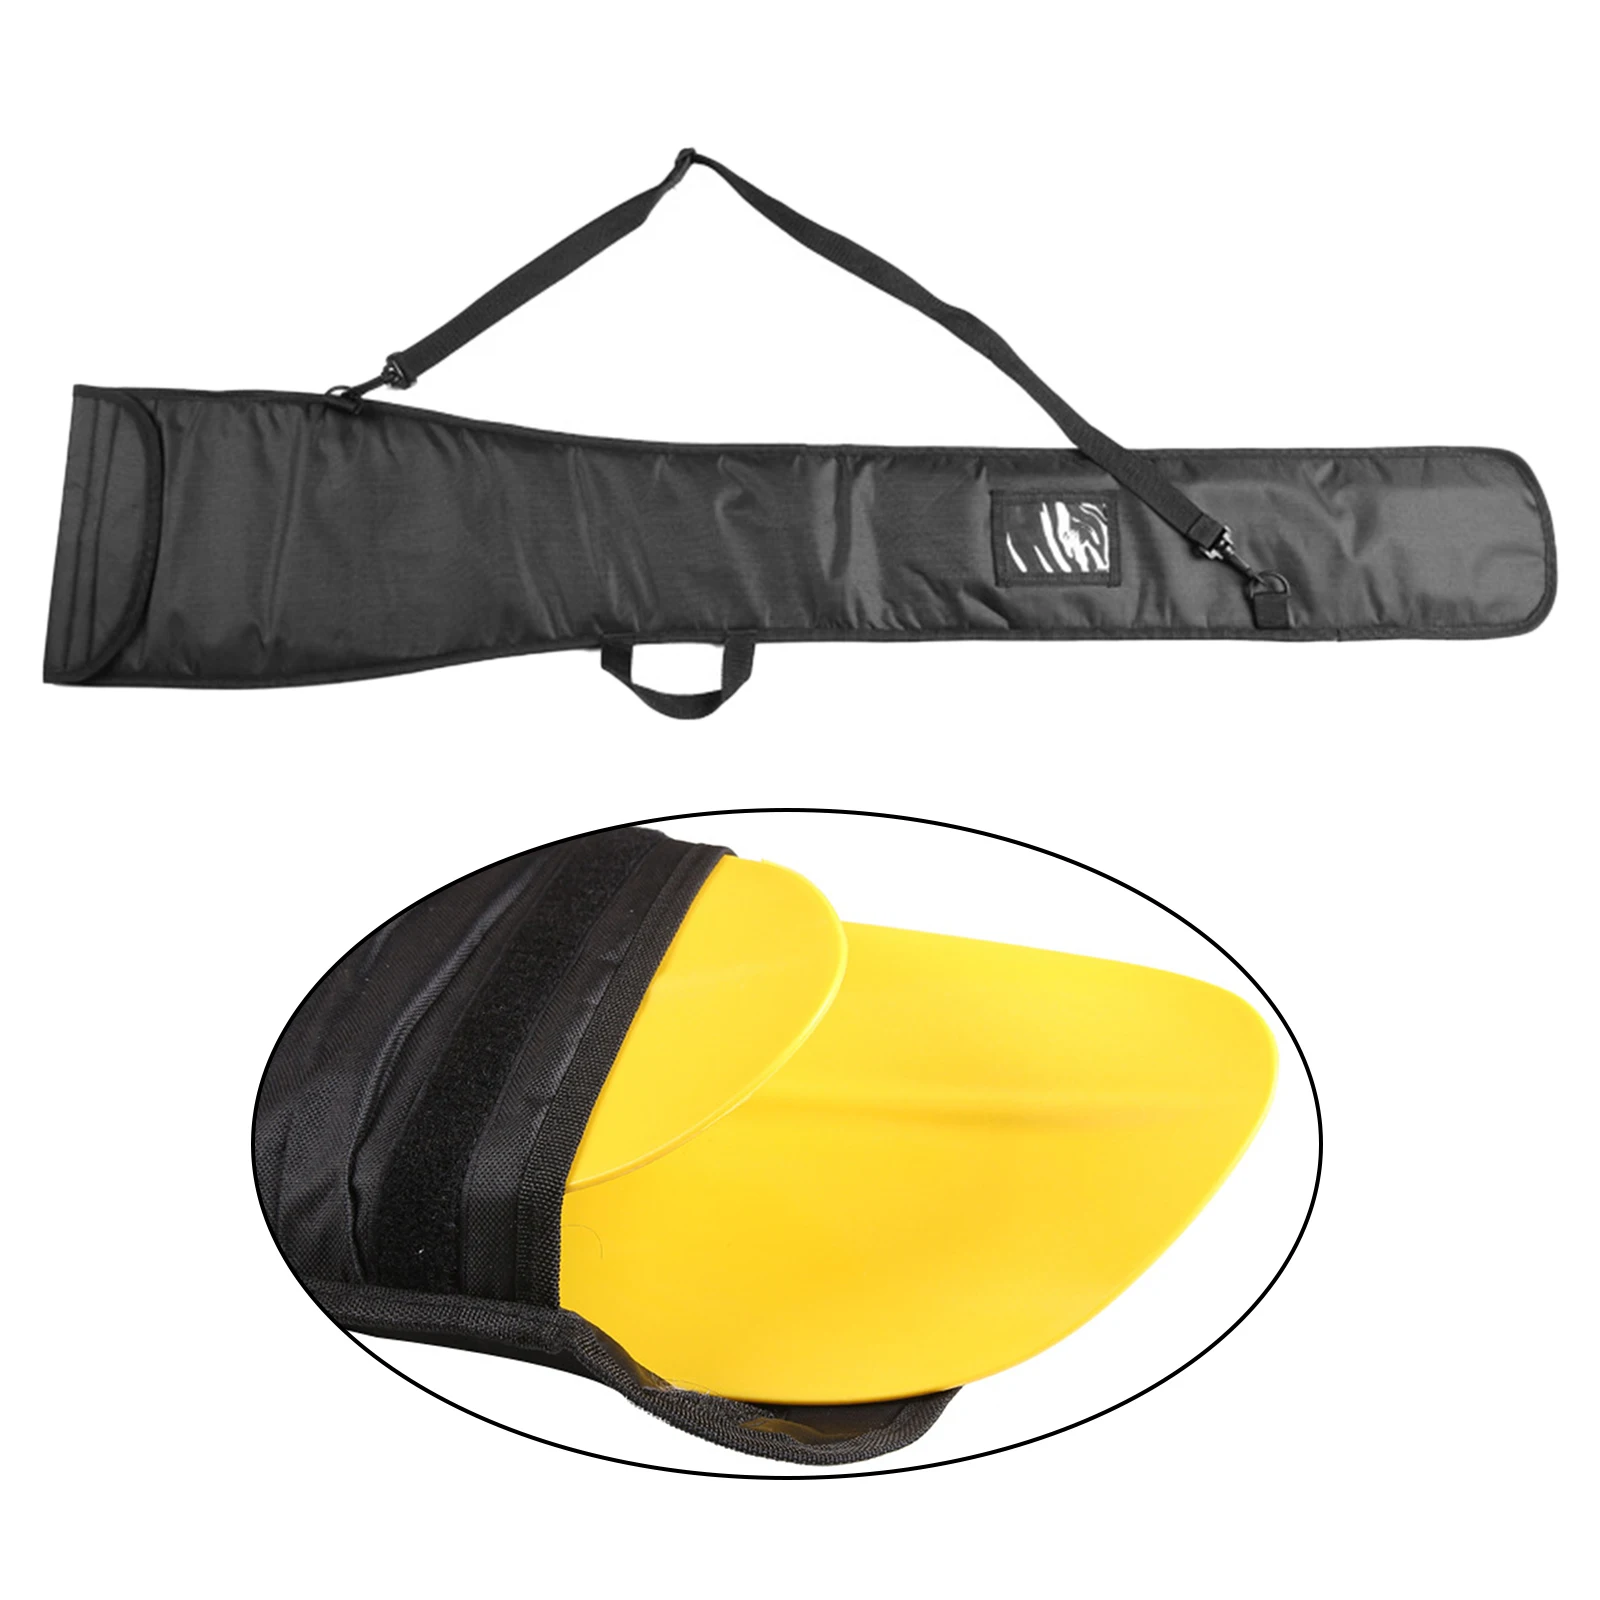 Kayak Paddle Bag 50inch Long Double Paddle Storage Bag Pouch Holder Oxford 